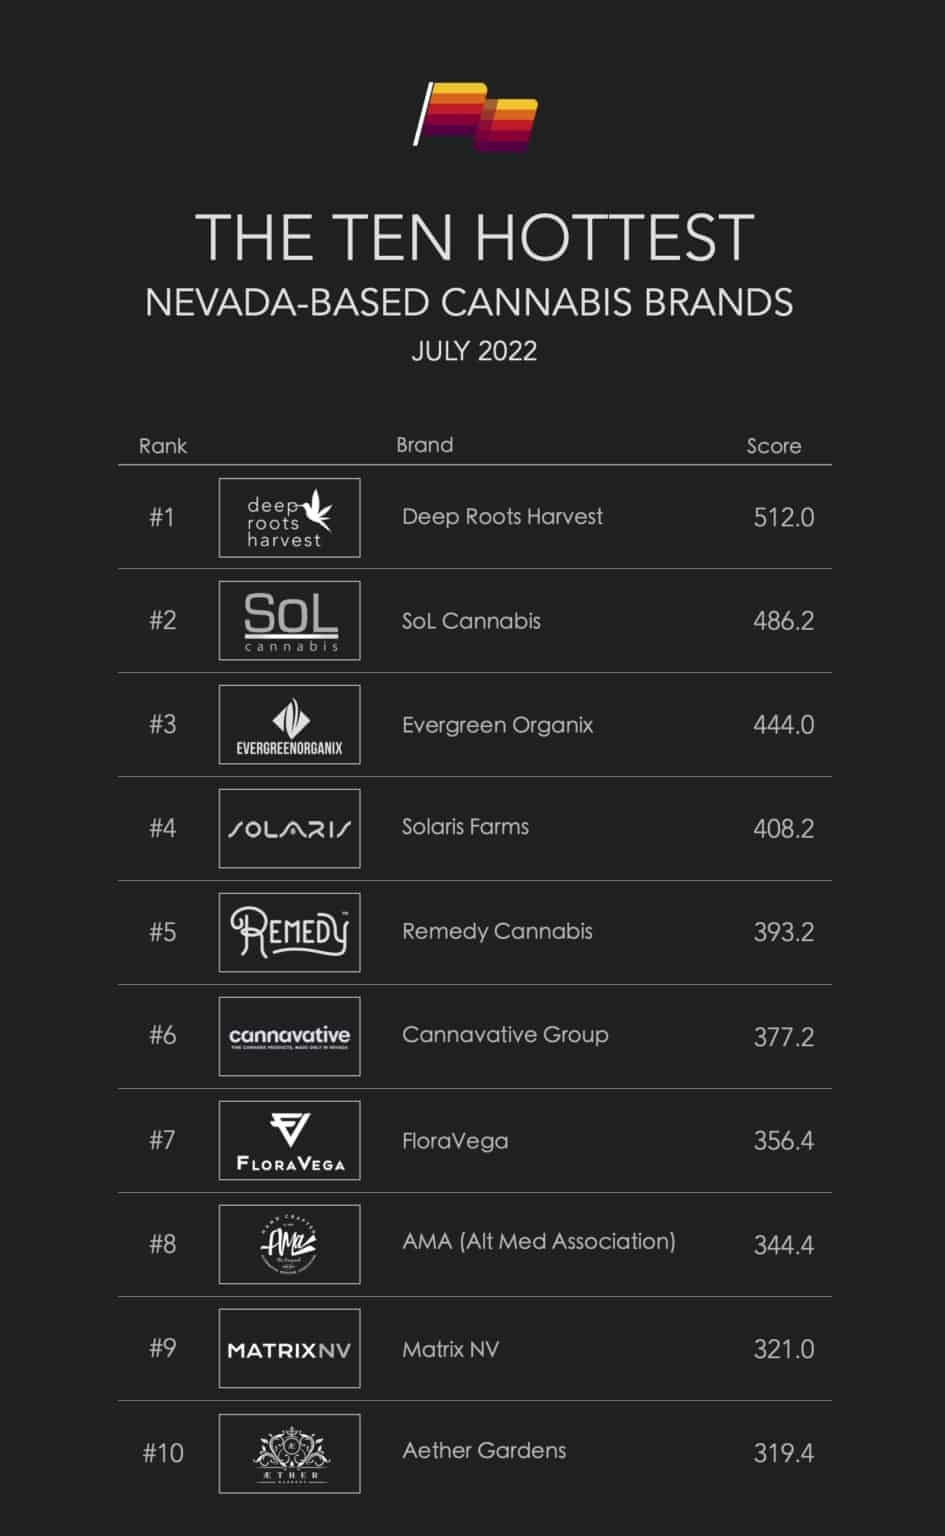 Pioneer’s Top 10 Hottest Nevada-Based Cannabis Brands 